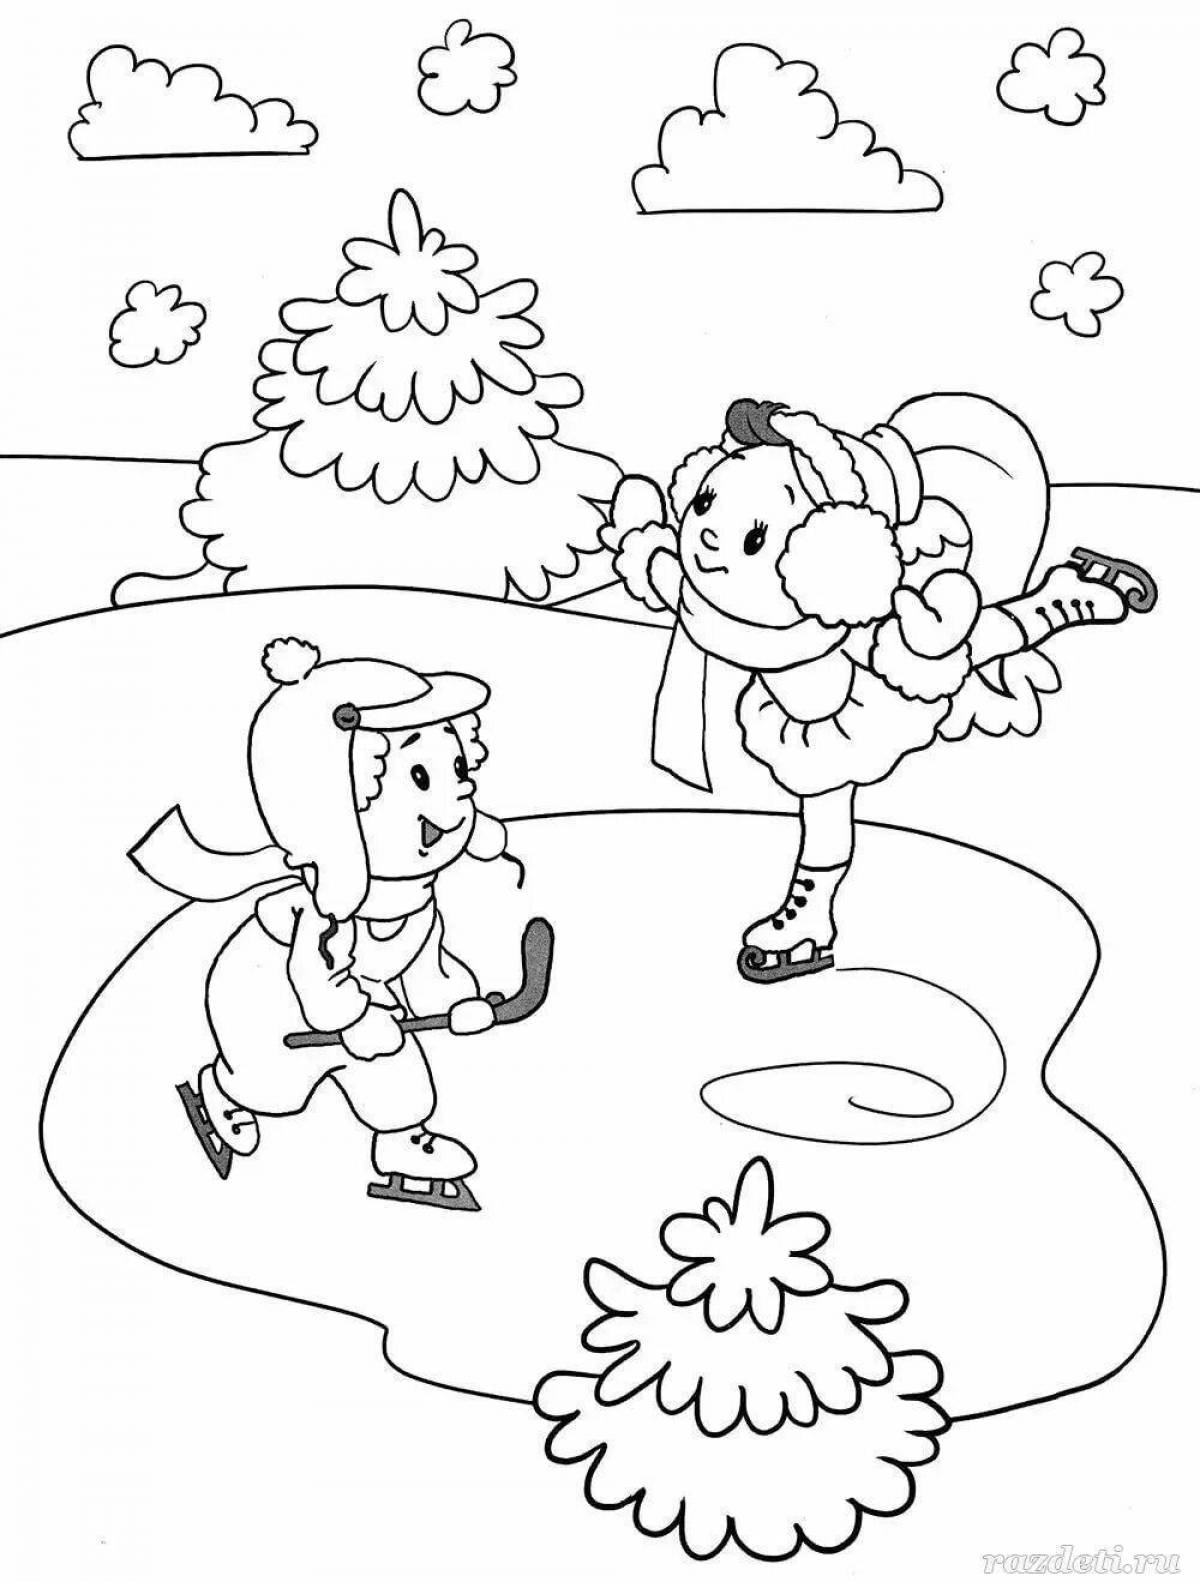 Playful winter coloring book for children 6-7 years old